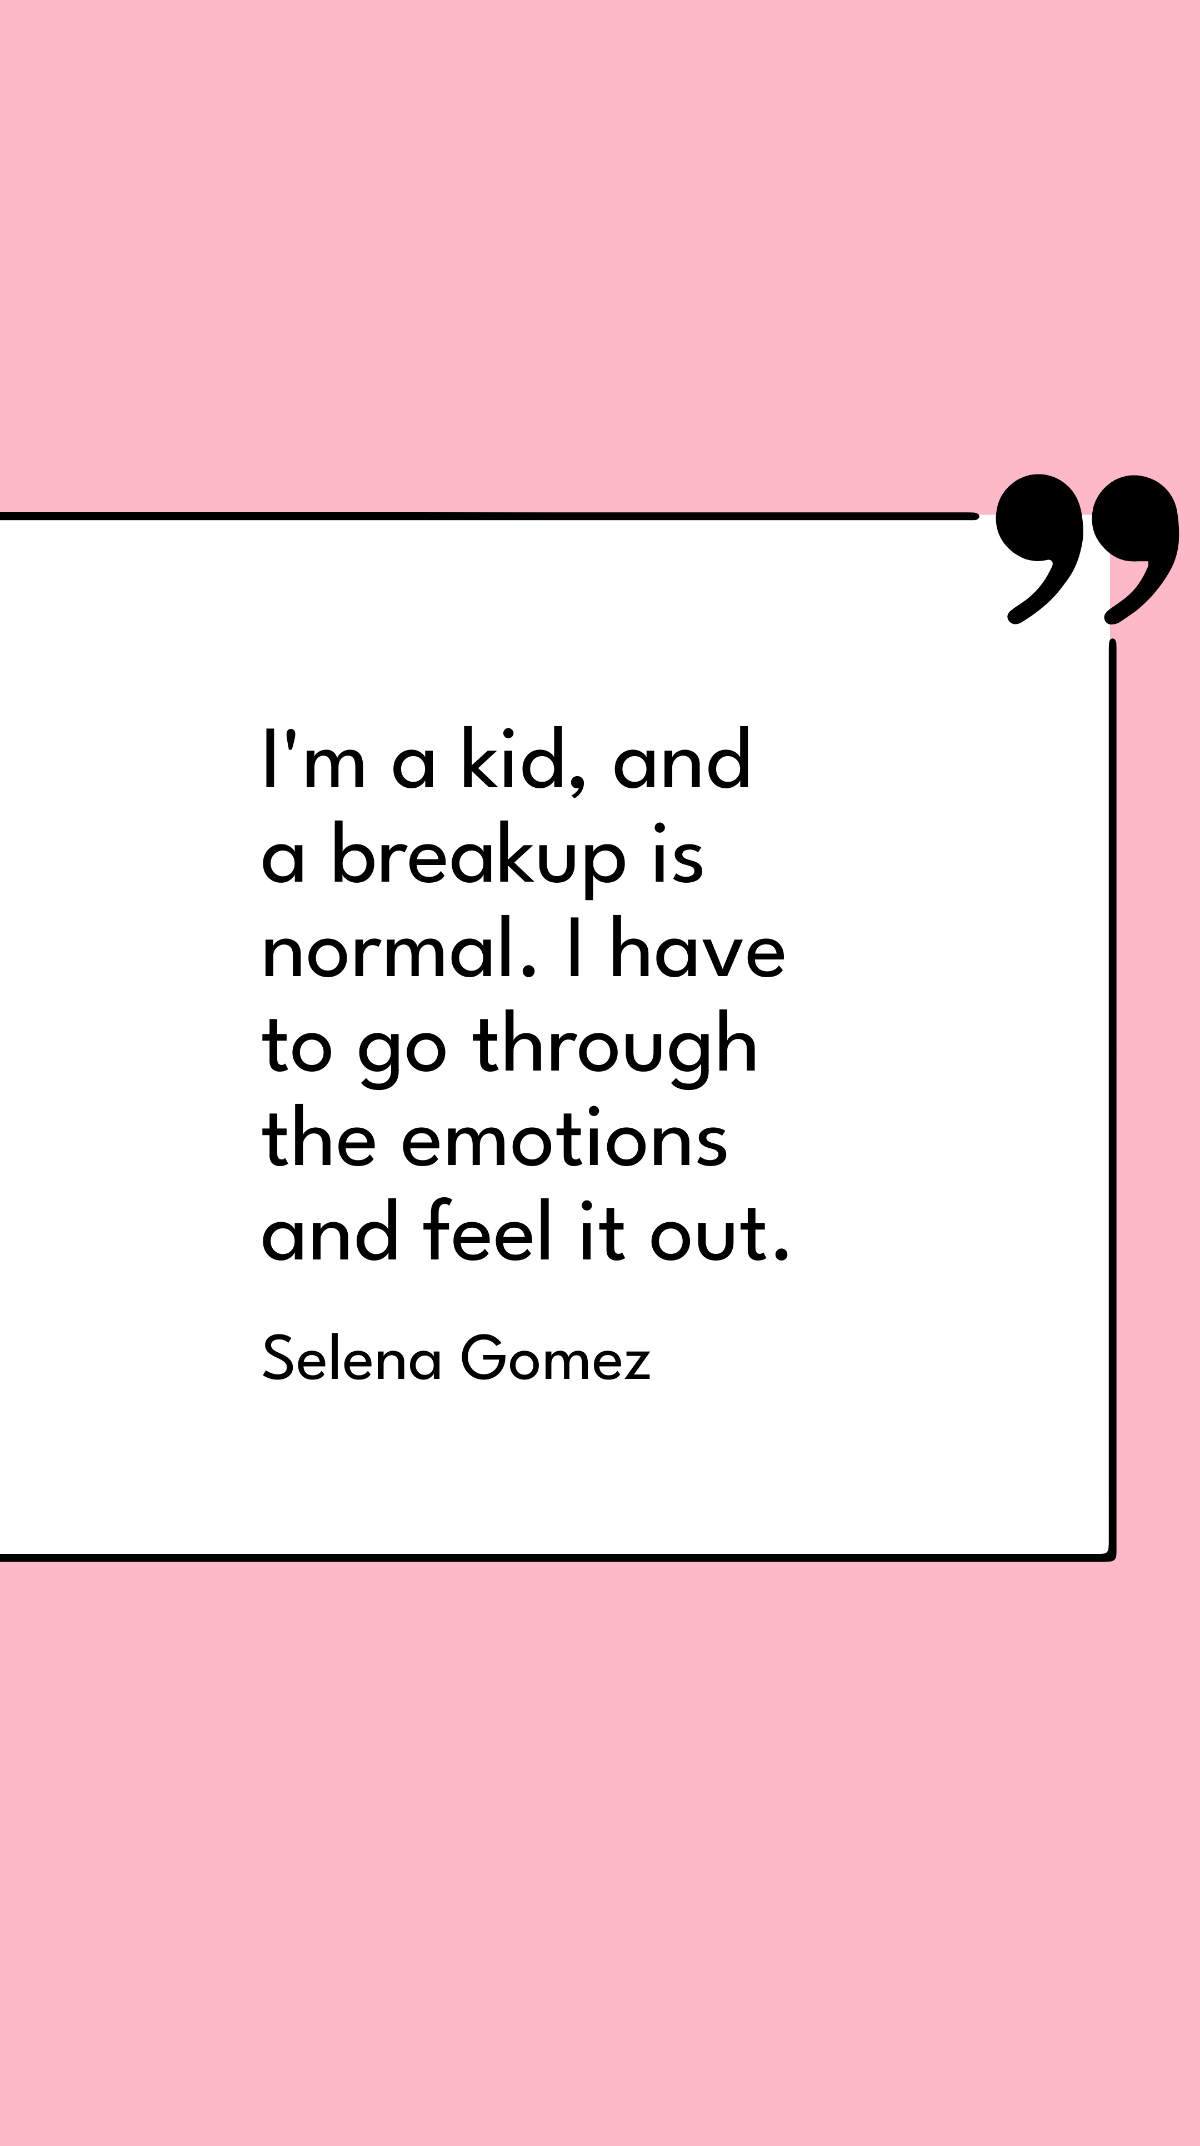 Free Selena Gomez - I'm a kid, and a breakup is normal. I have to go through the emotions and feel it out. Template